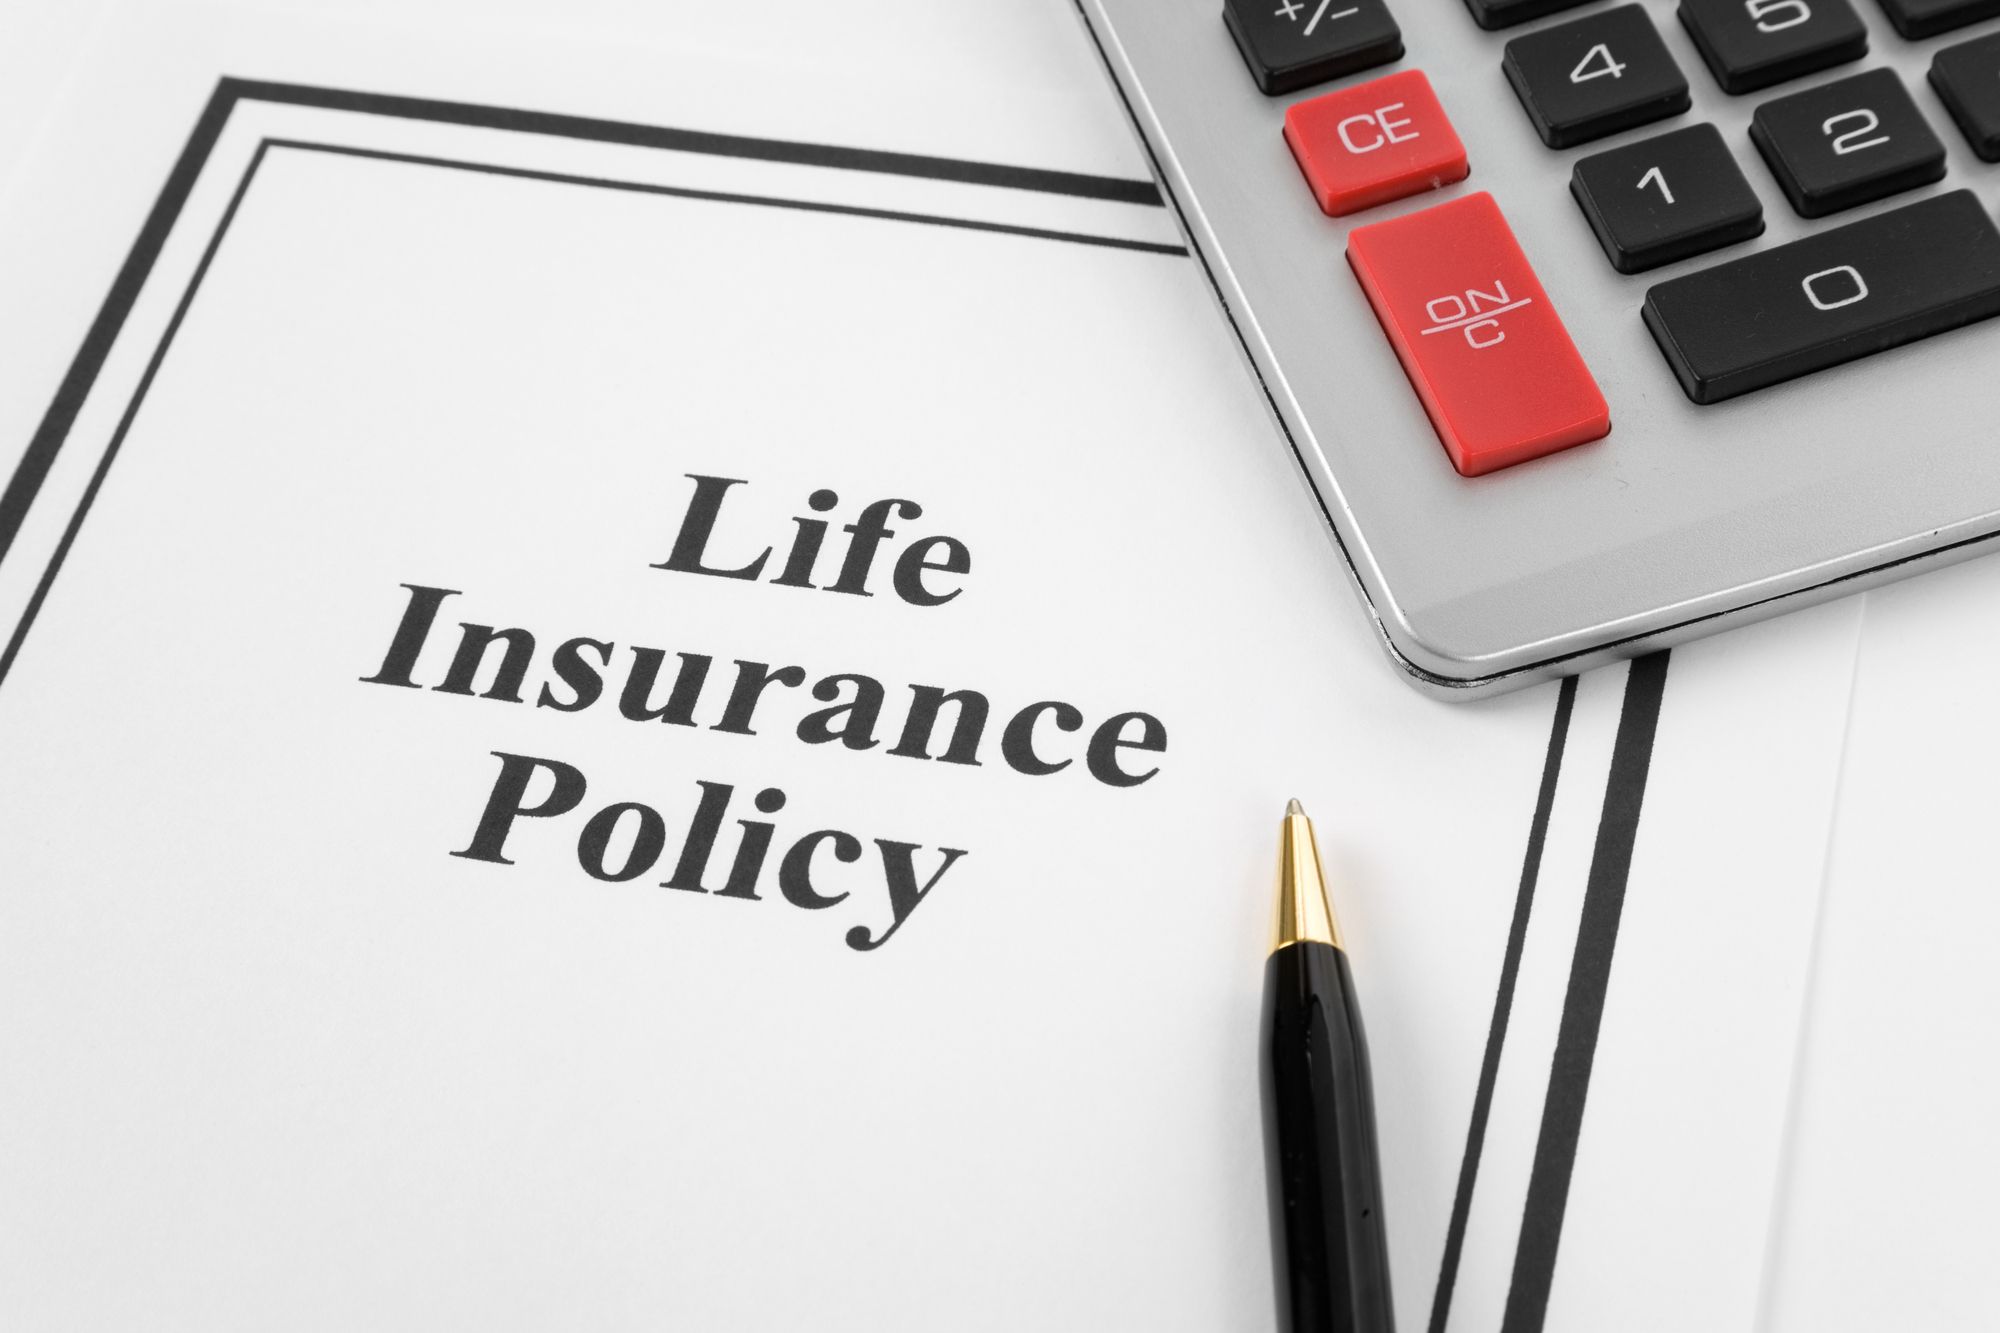 Life insurance policy paperwork